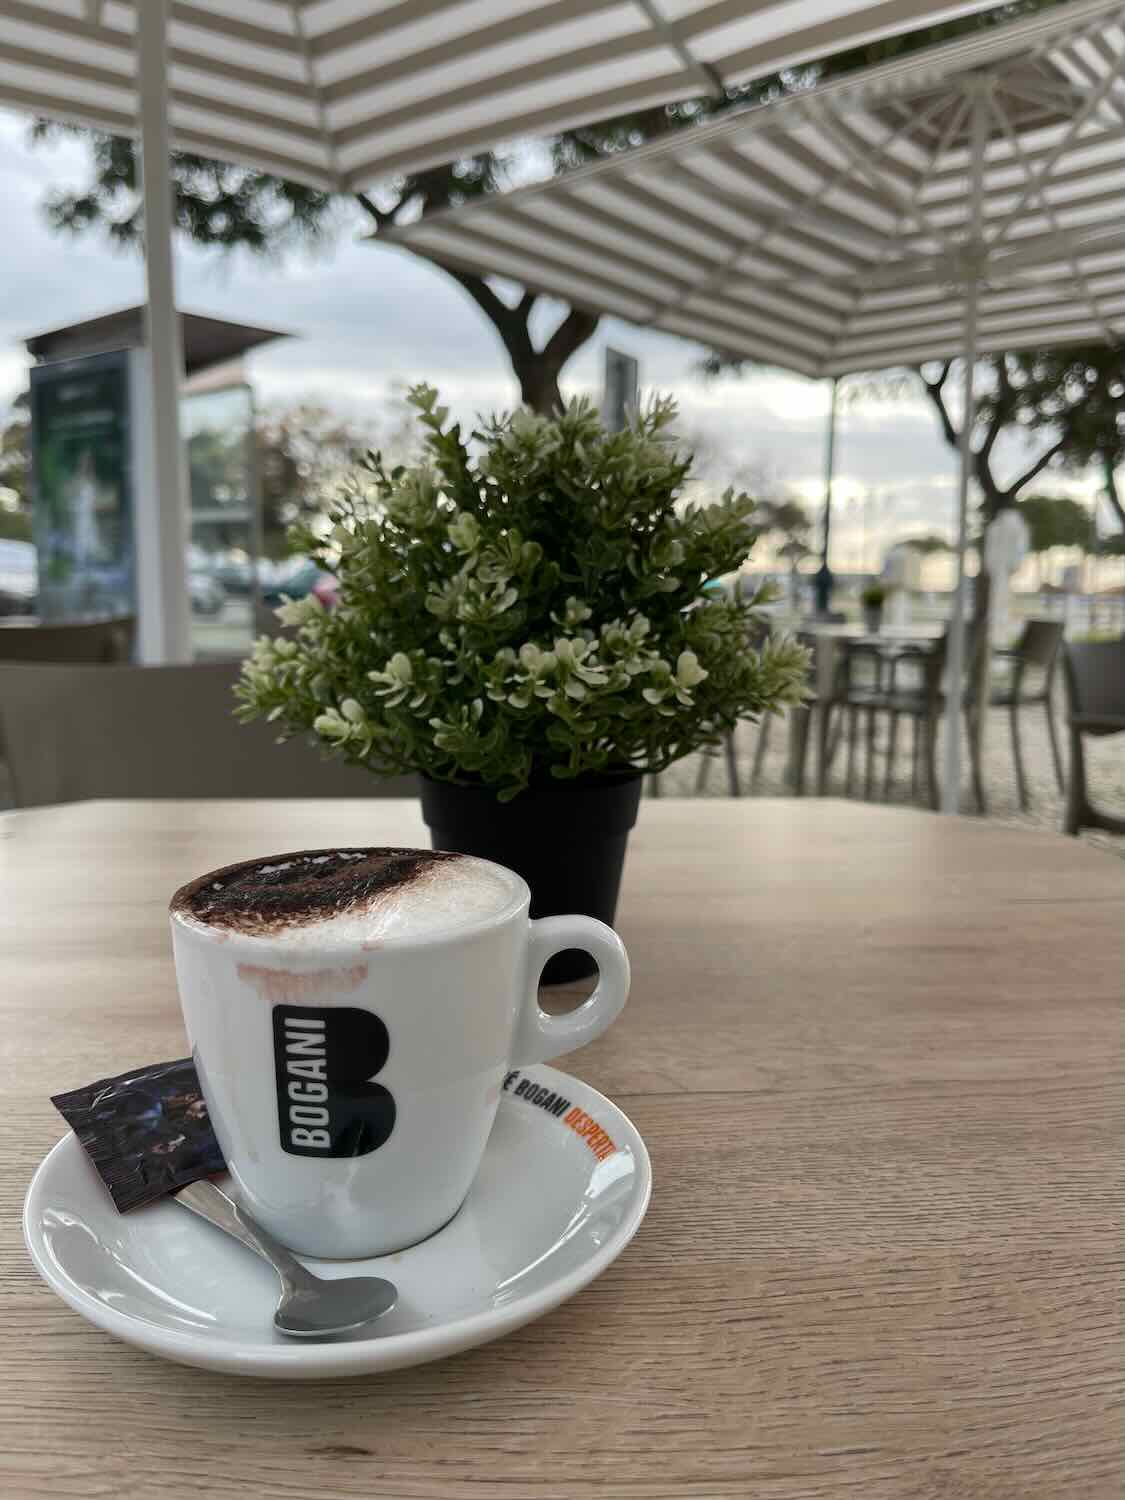 Close-up of a cappuccino in a white cup with the logo 'BOGANI' on a wooden table, accompanied by a sugar packet, with a potted green plant in the background and an outdoor patio setting with white pergola overhead.